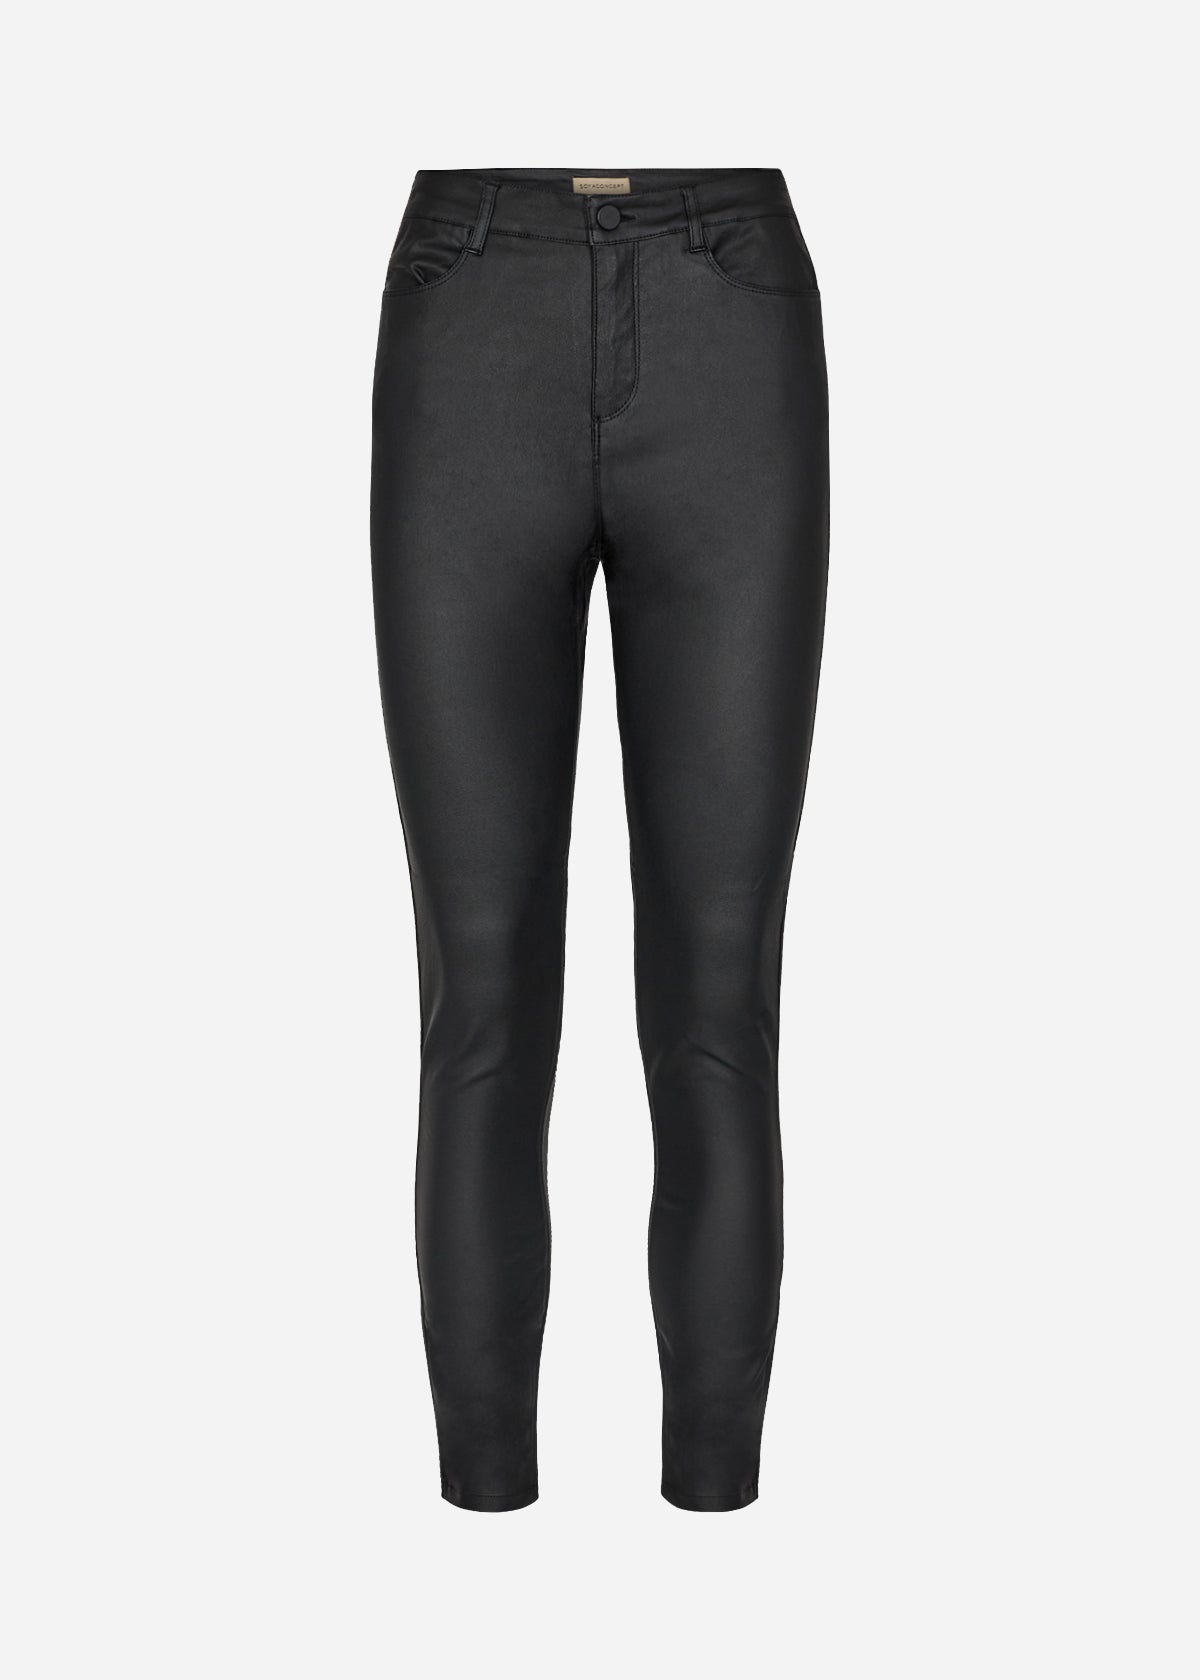 Soya Concept PAM Black Trousers.